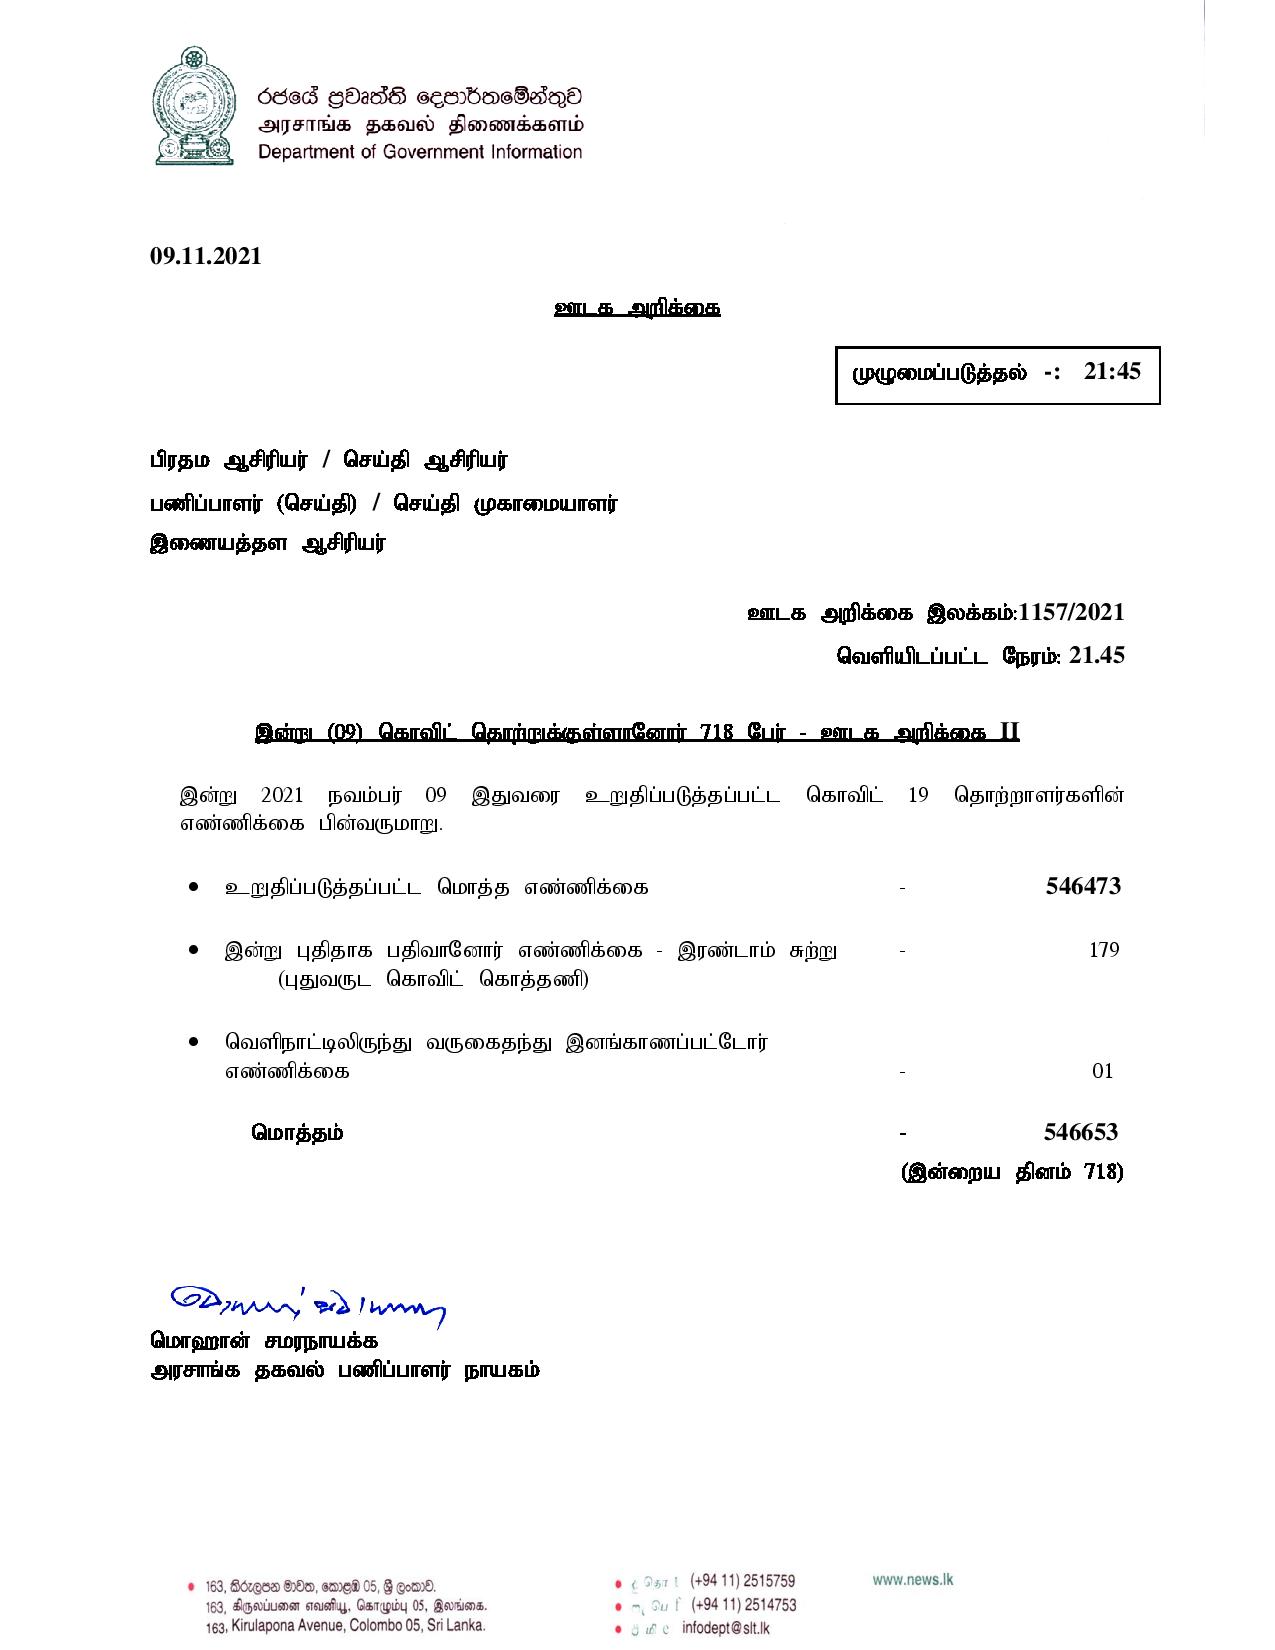 Press Release 1157 Tamil page 001